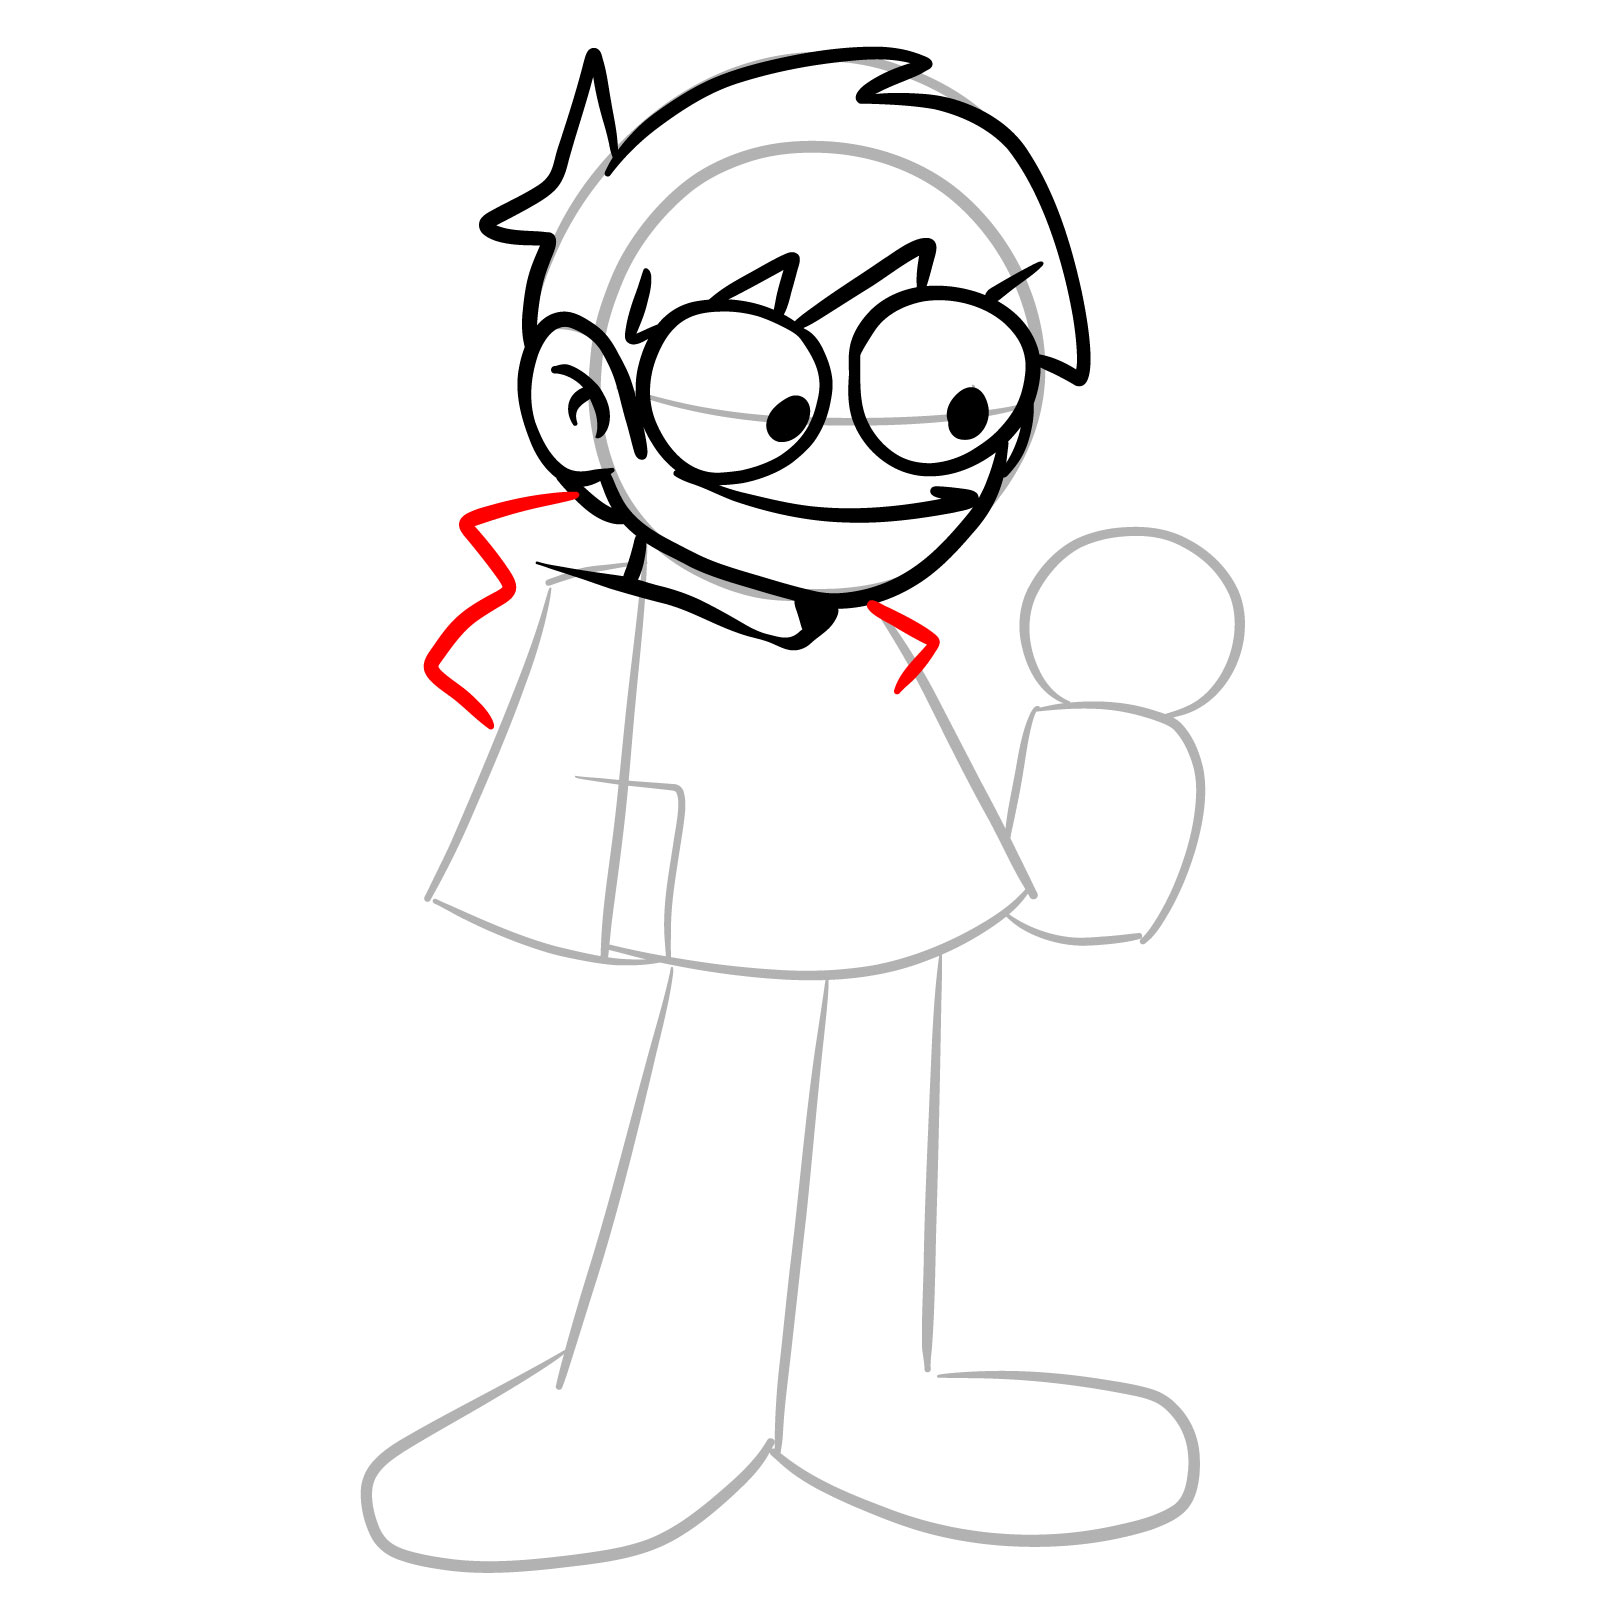 How to draw Edd from Online Vs - step 12